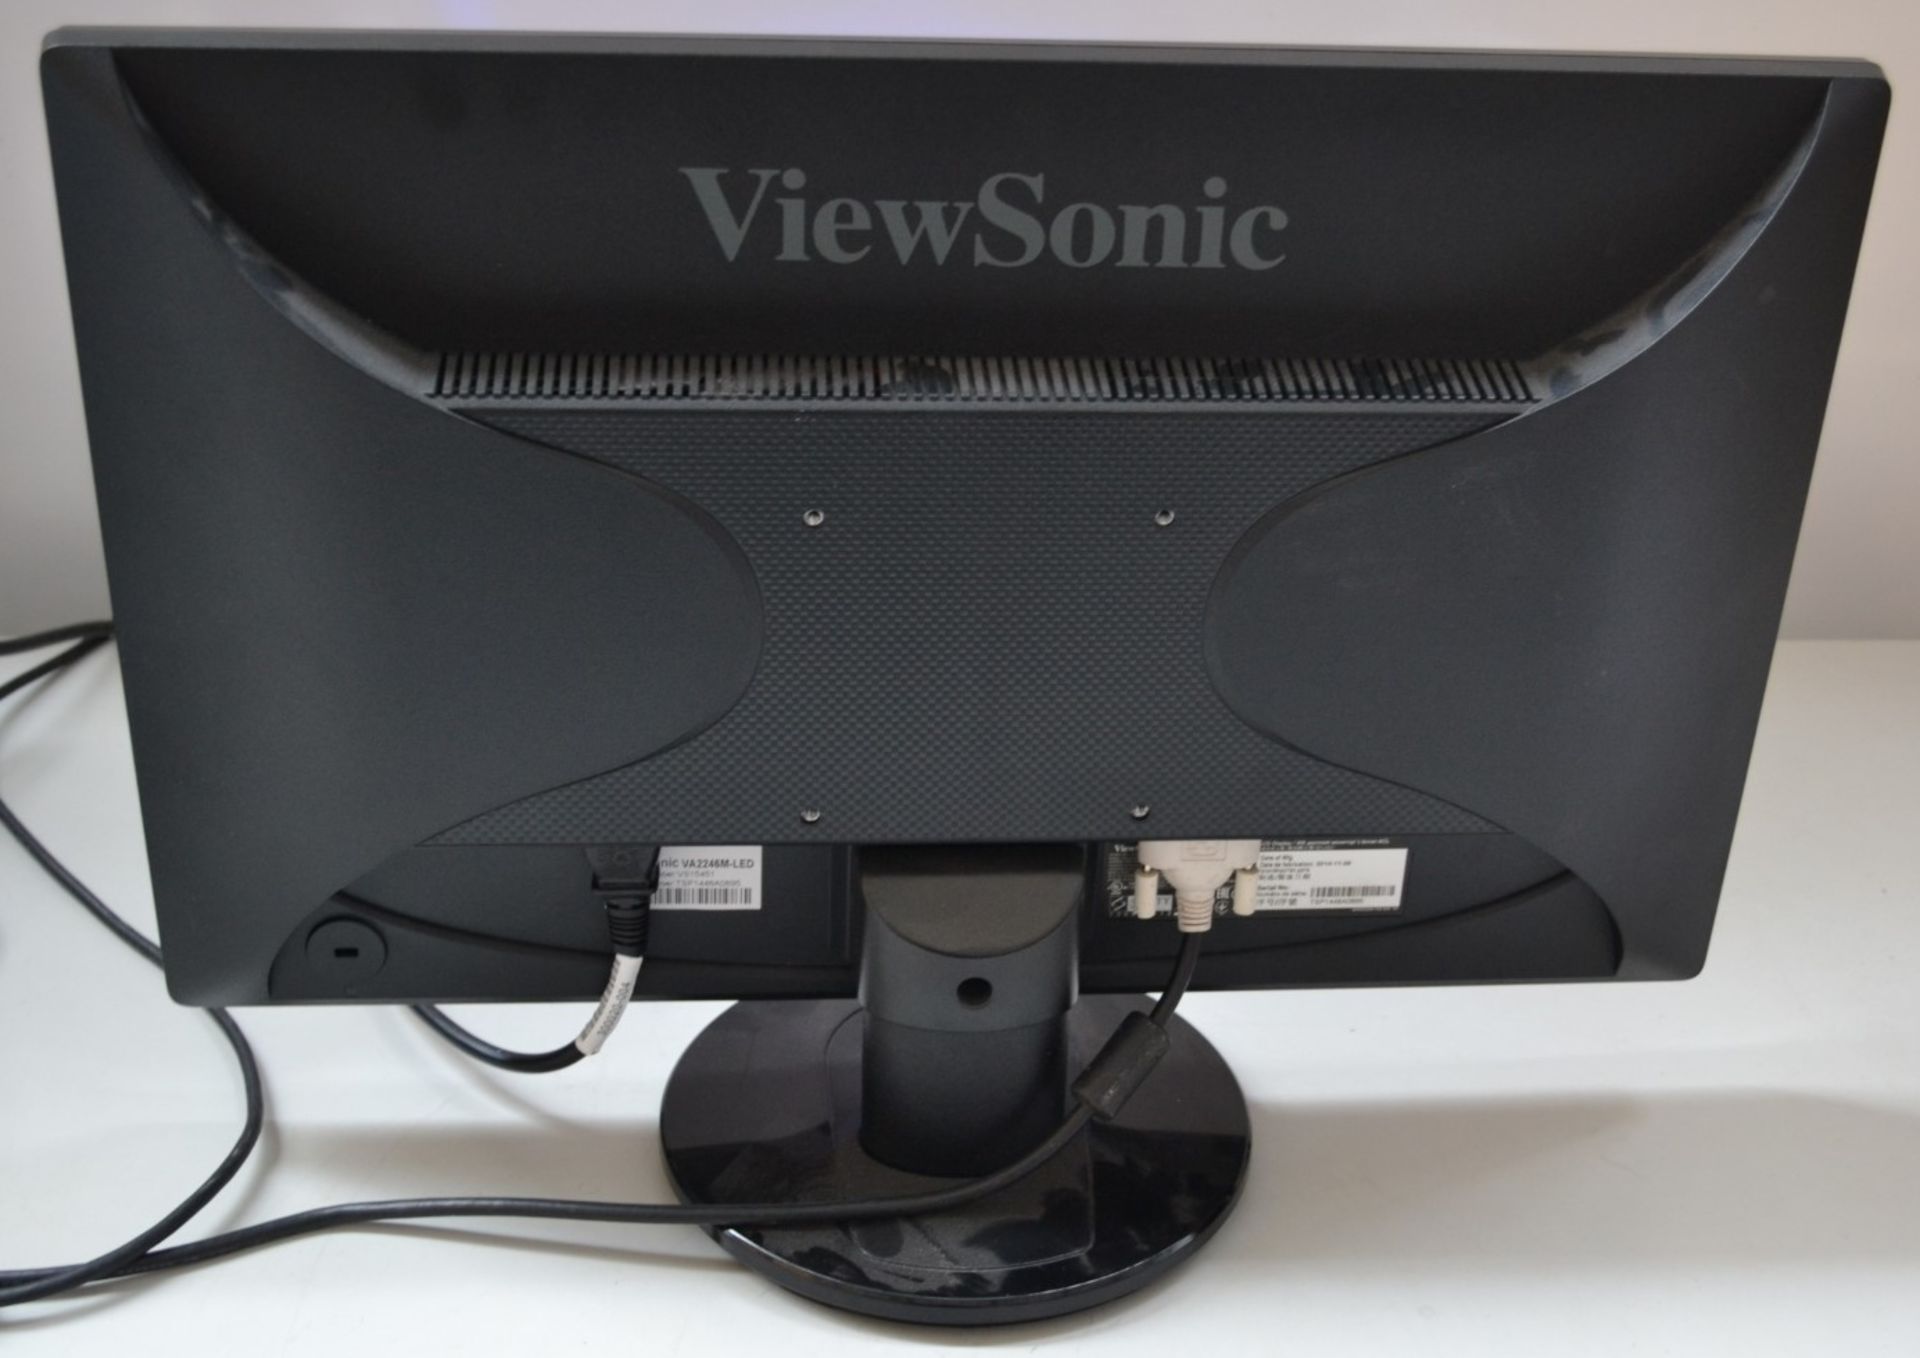 2 x View Sonic VA2246MLED 22" Widescreen PC Monitors - Ref J2245 - Image 2 of 2